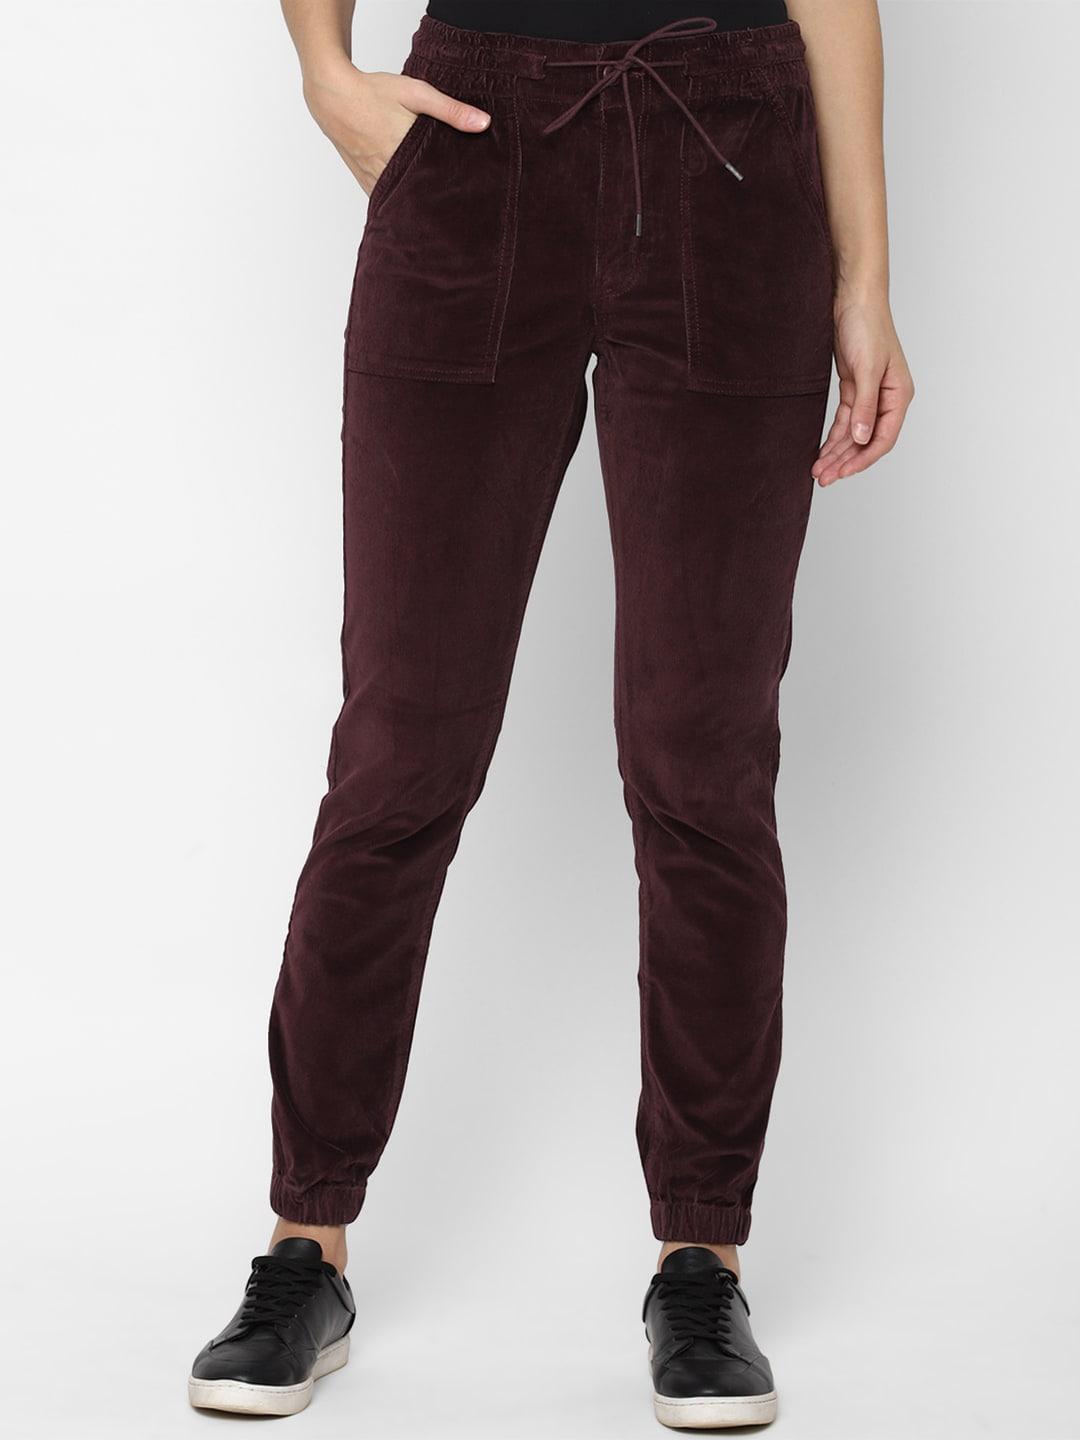 AMERICAN EAGLE OUTFITTERS Women Burgundy Solid Slim Fit Joggers